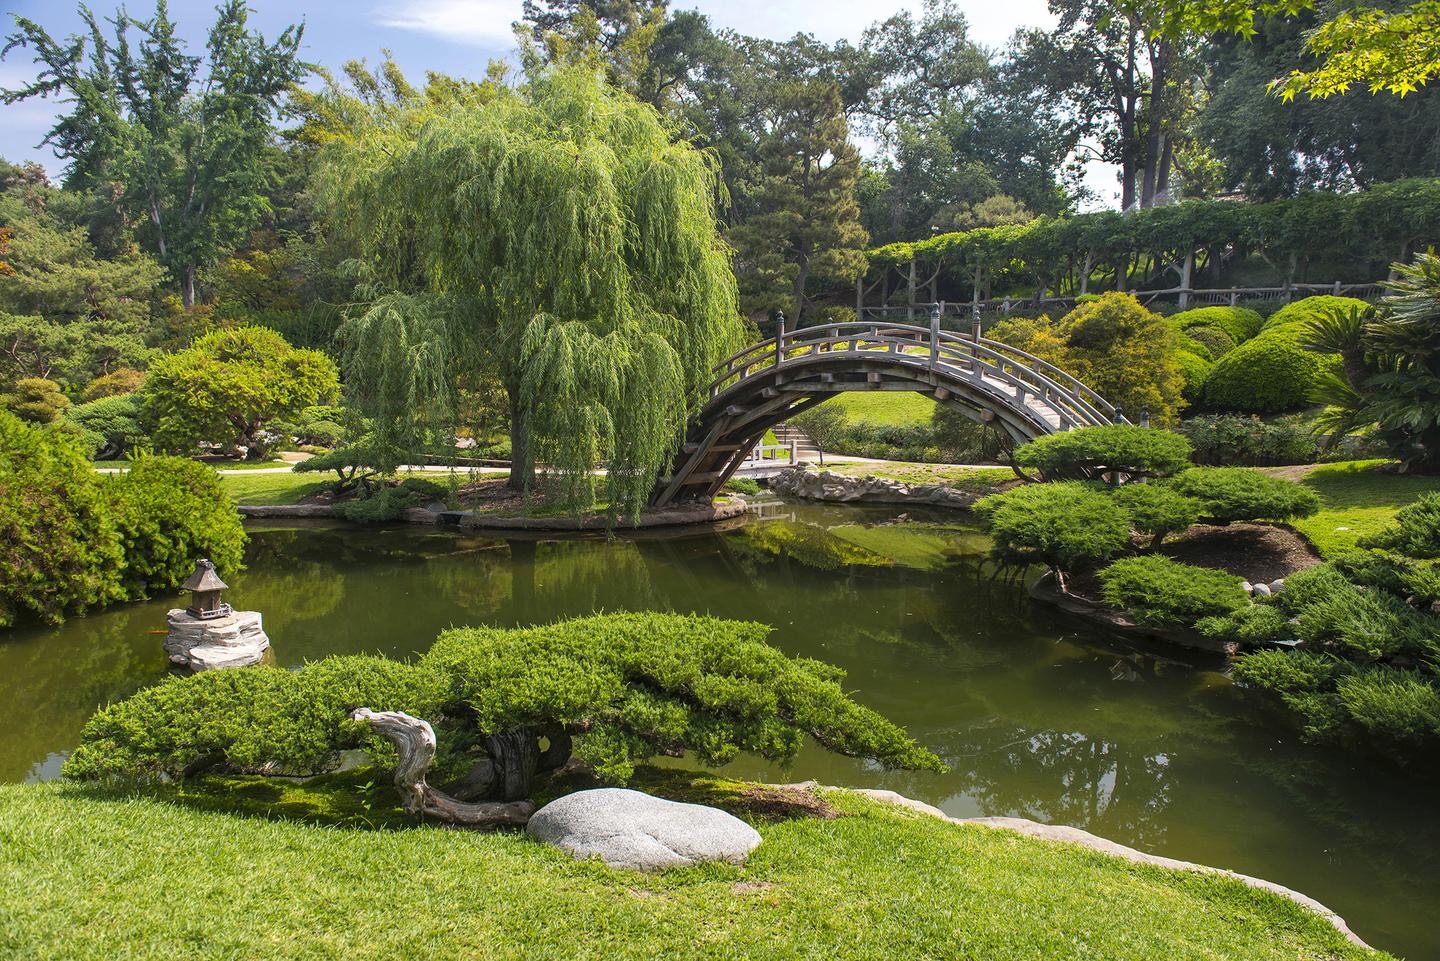 Japanese Gardens At The Huntington Library Projects Portfolio